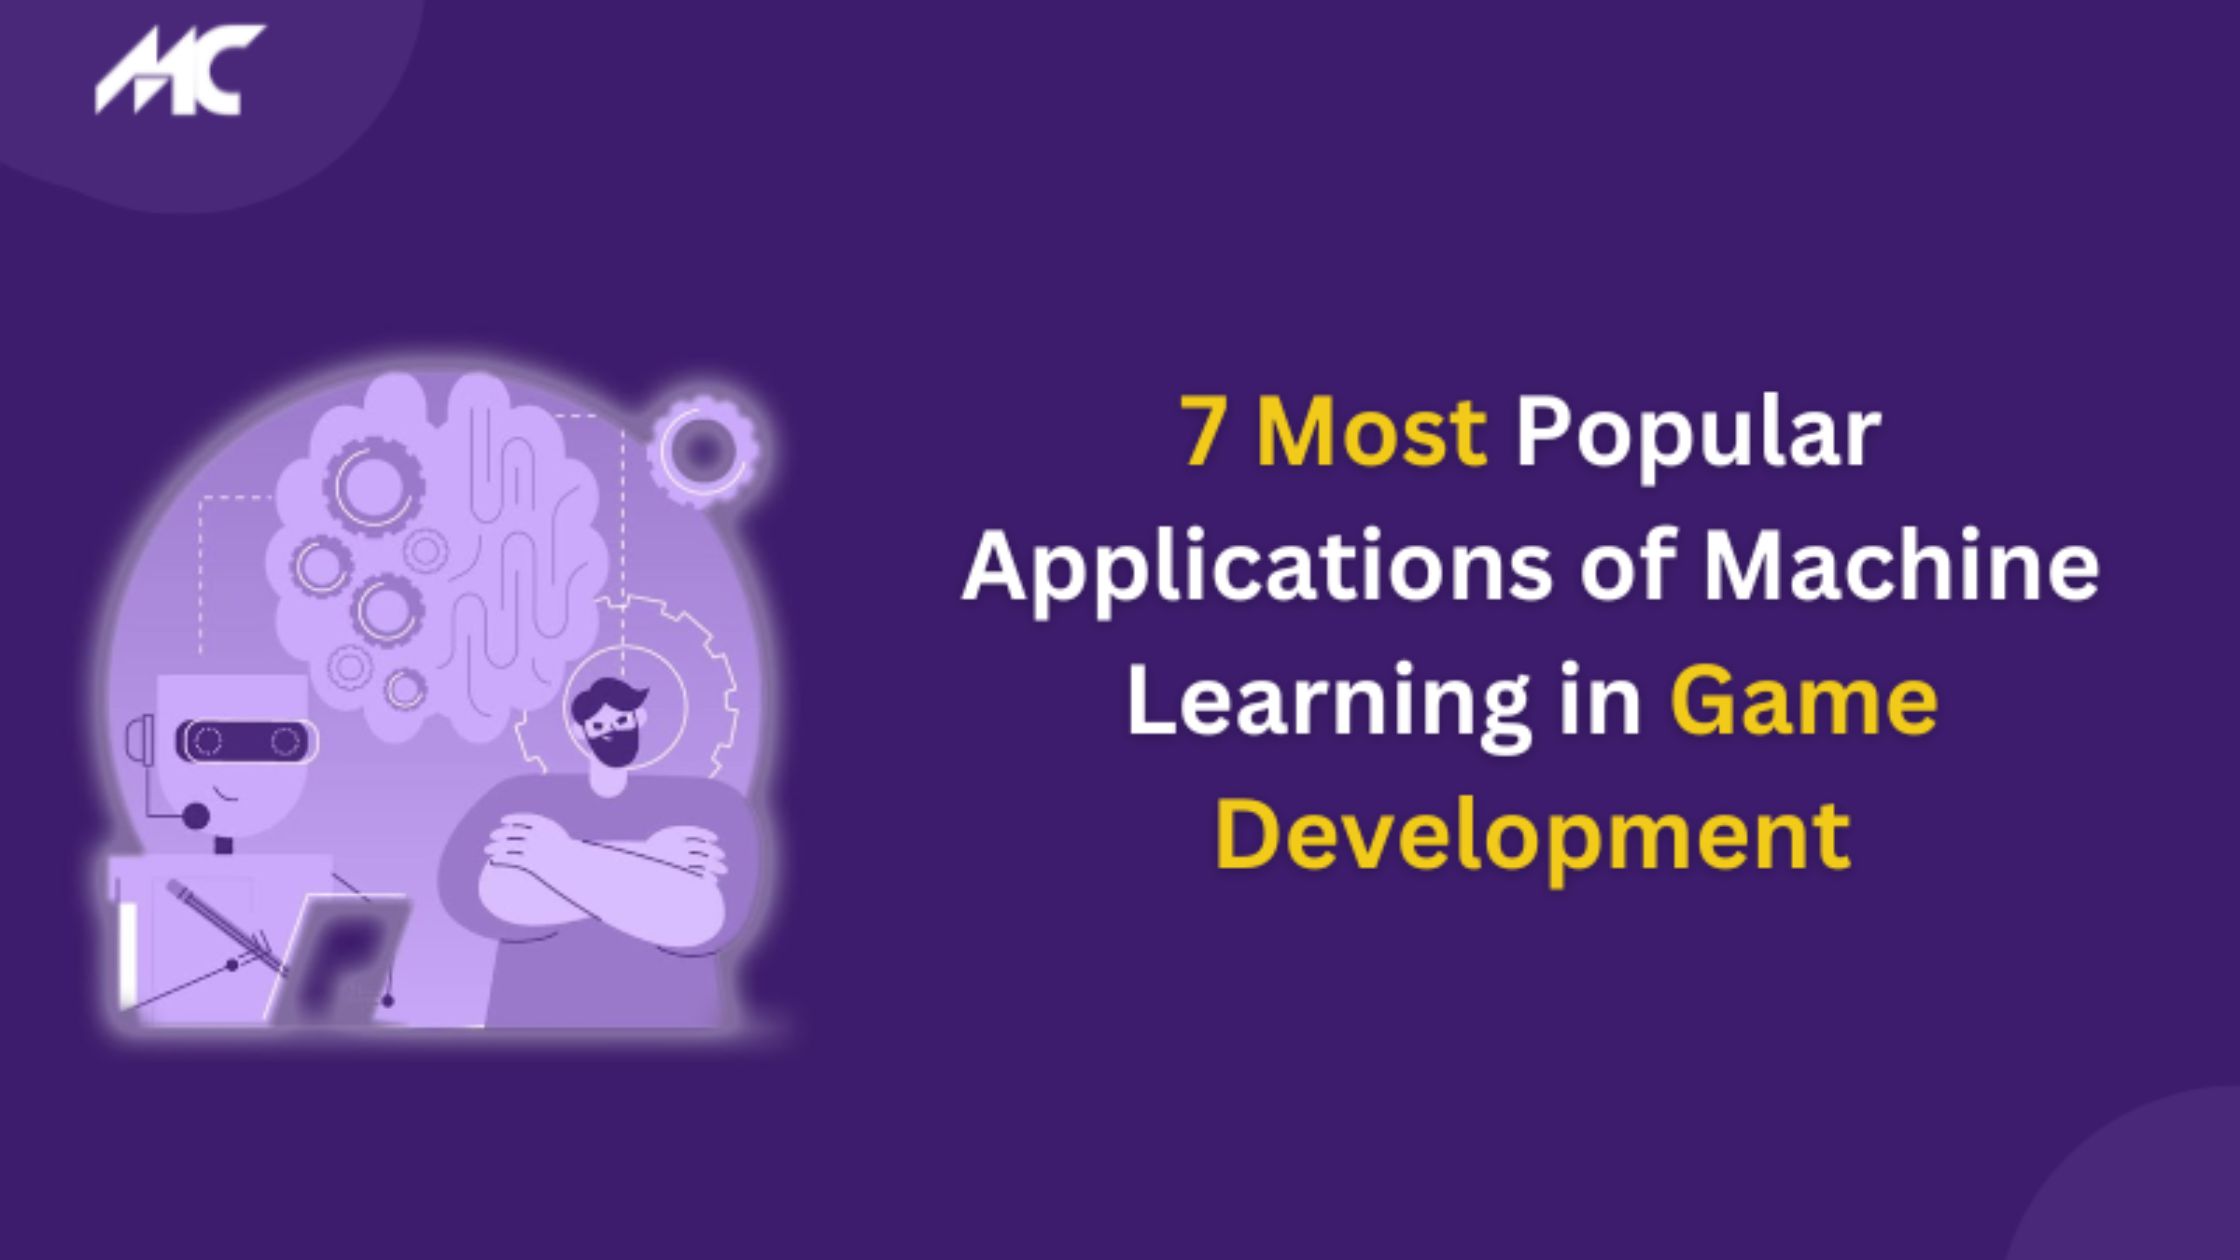 7 Most Popular Applications of Machine Learning in Game Development